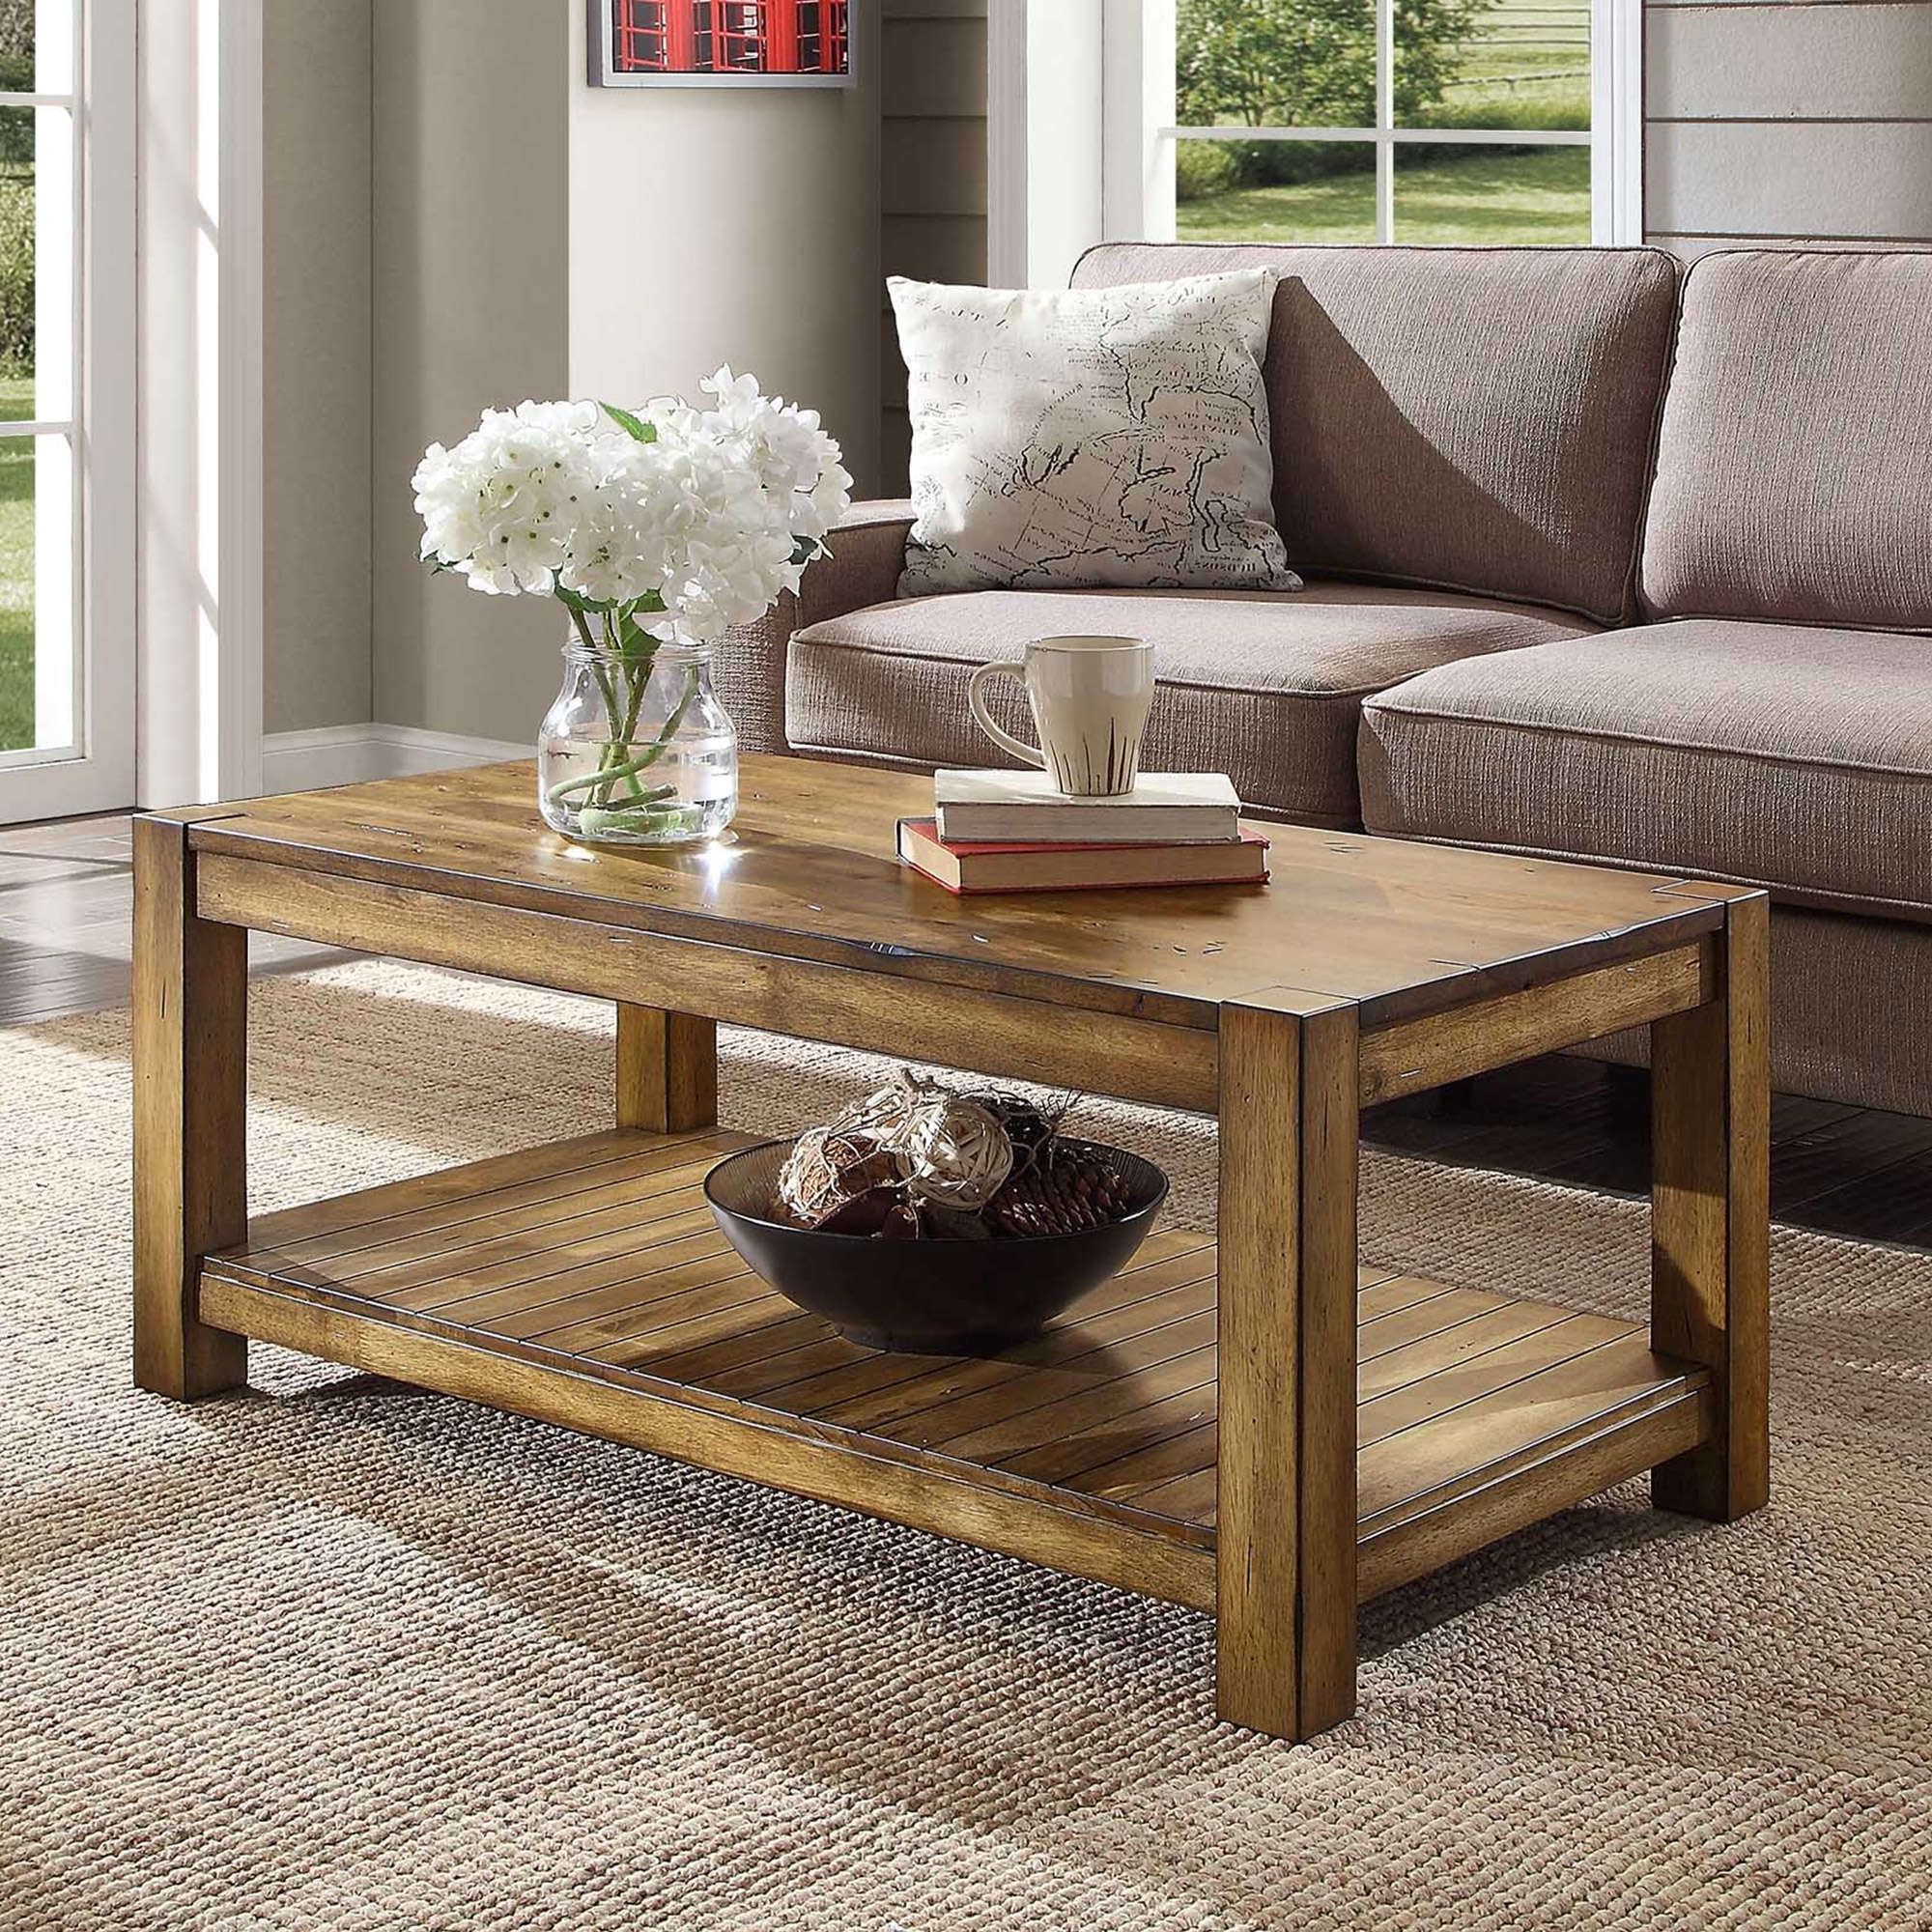 Bryant Solid Wood Coffee Table, Rustic Maple Brown Finish – Walmart Pertaining To Brown Rustic Coffee Tables (Gallery 2 of 20)